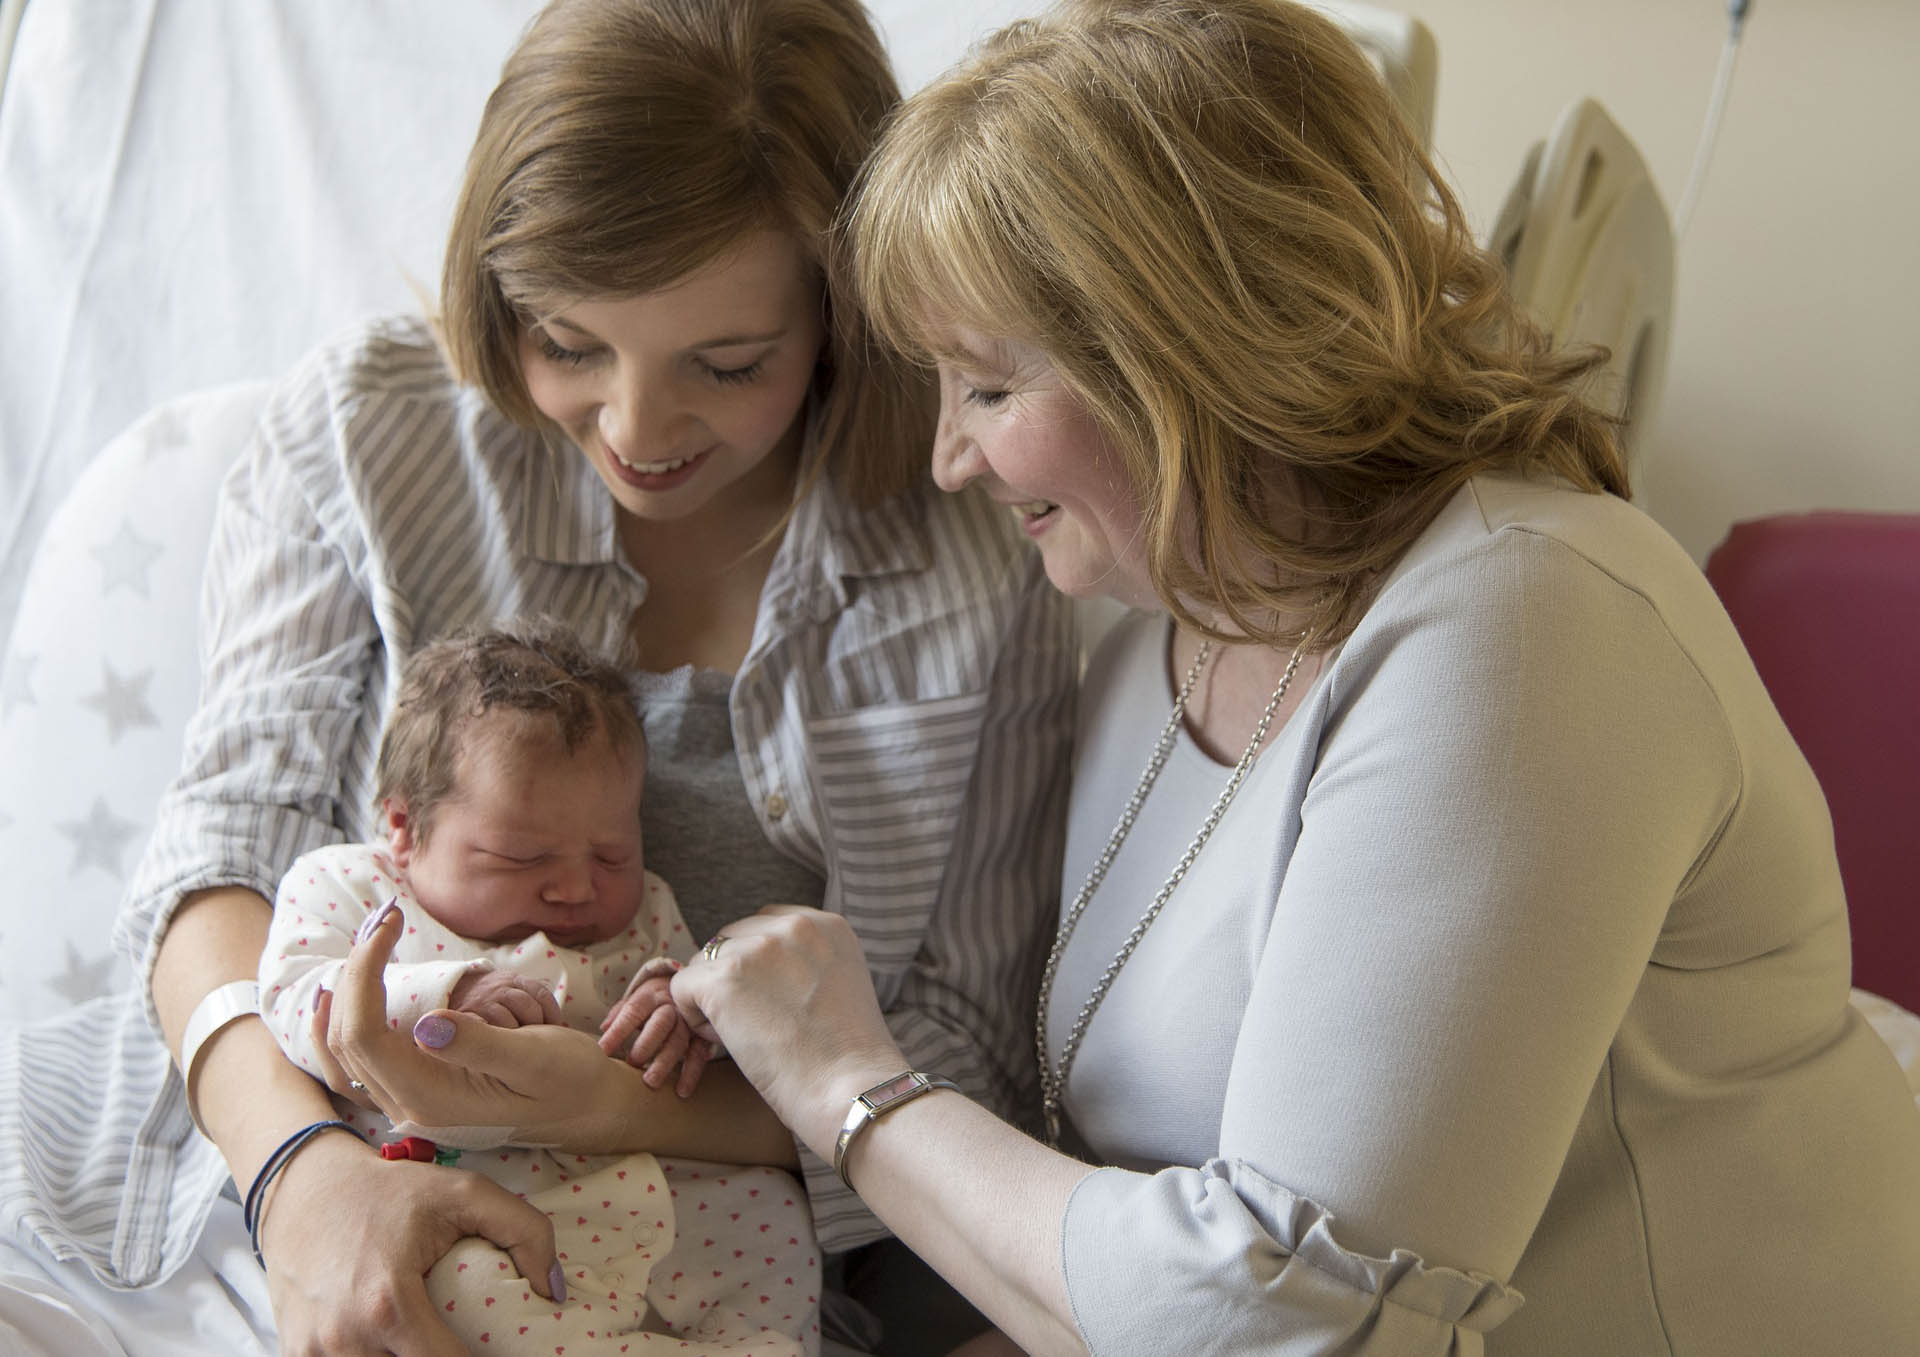 Mother and grandmother smiling while holding newborn baby